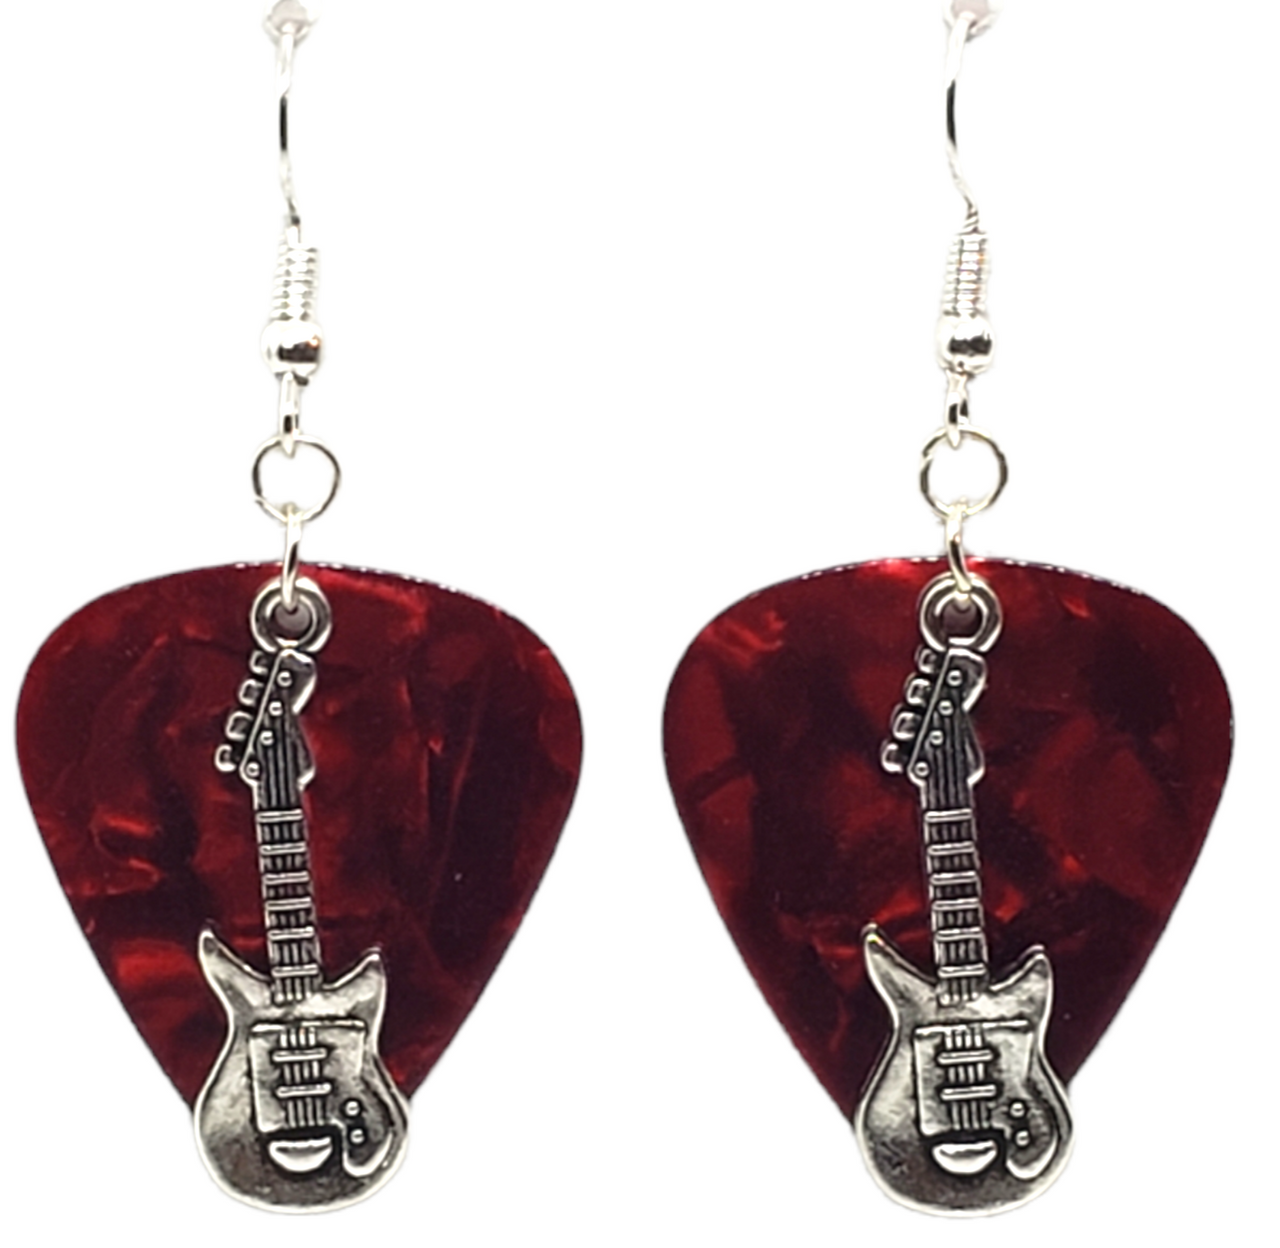 NEW Handmade in USA Guitar Pick Earrings with Beads SUN and MOON Charm Charms 